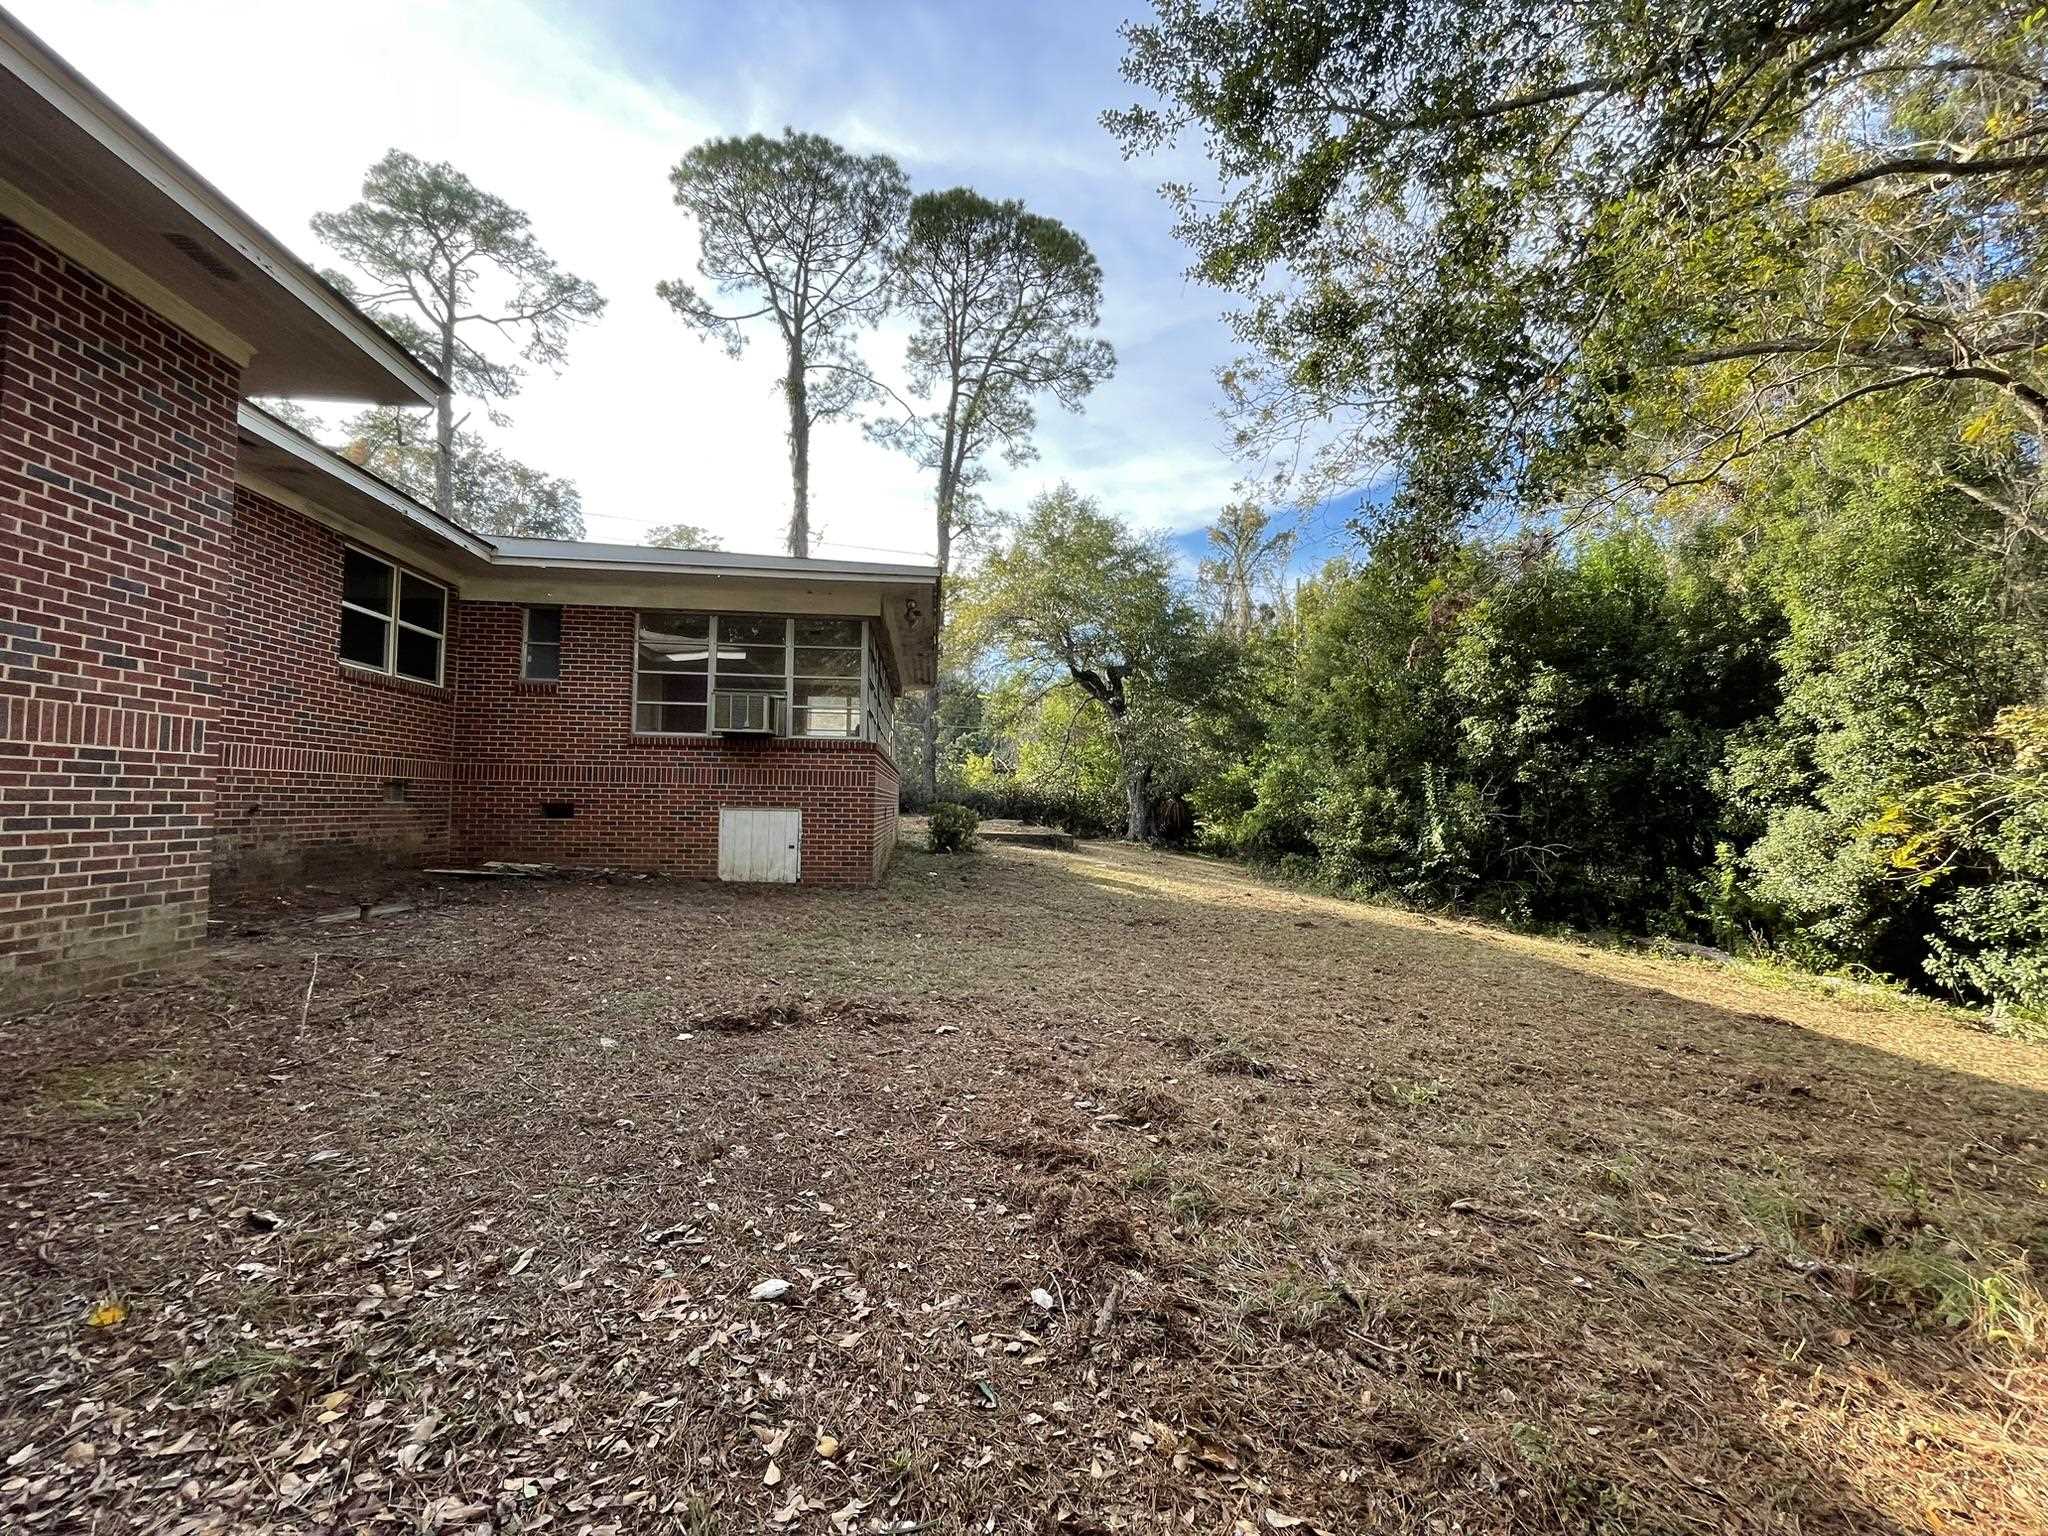 402 Glenview Drive,TALLAHASSEE,Florida 32303,3 Bedrooms Bedrooms,2 BathroomsBathrooms,Detached single family,402 Glenview Drive,366657